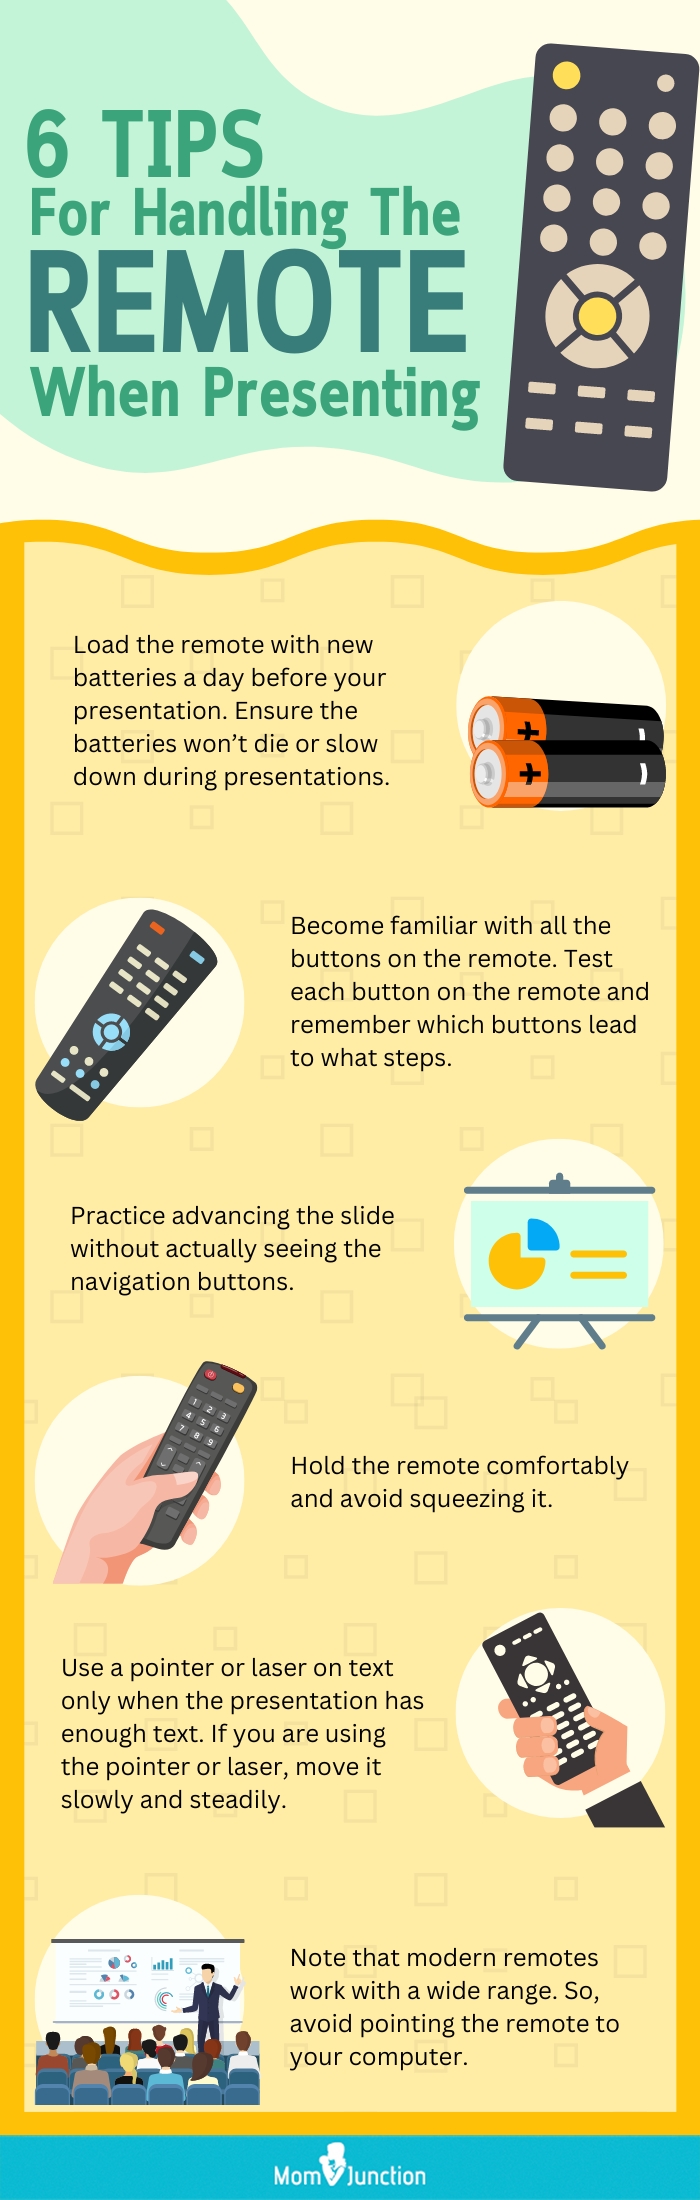 6 Tips For Handling The Remote When Presenting 233 content topics